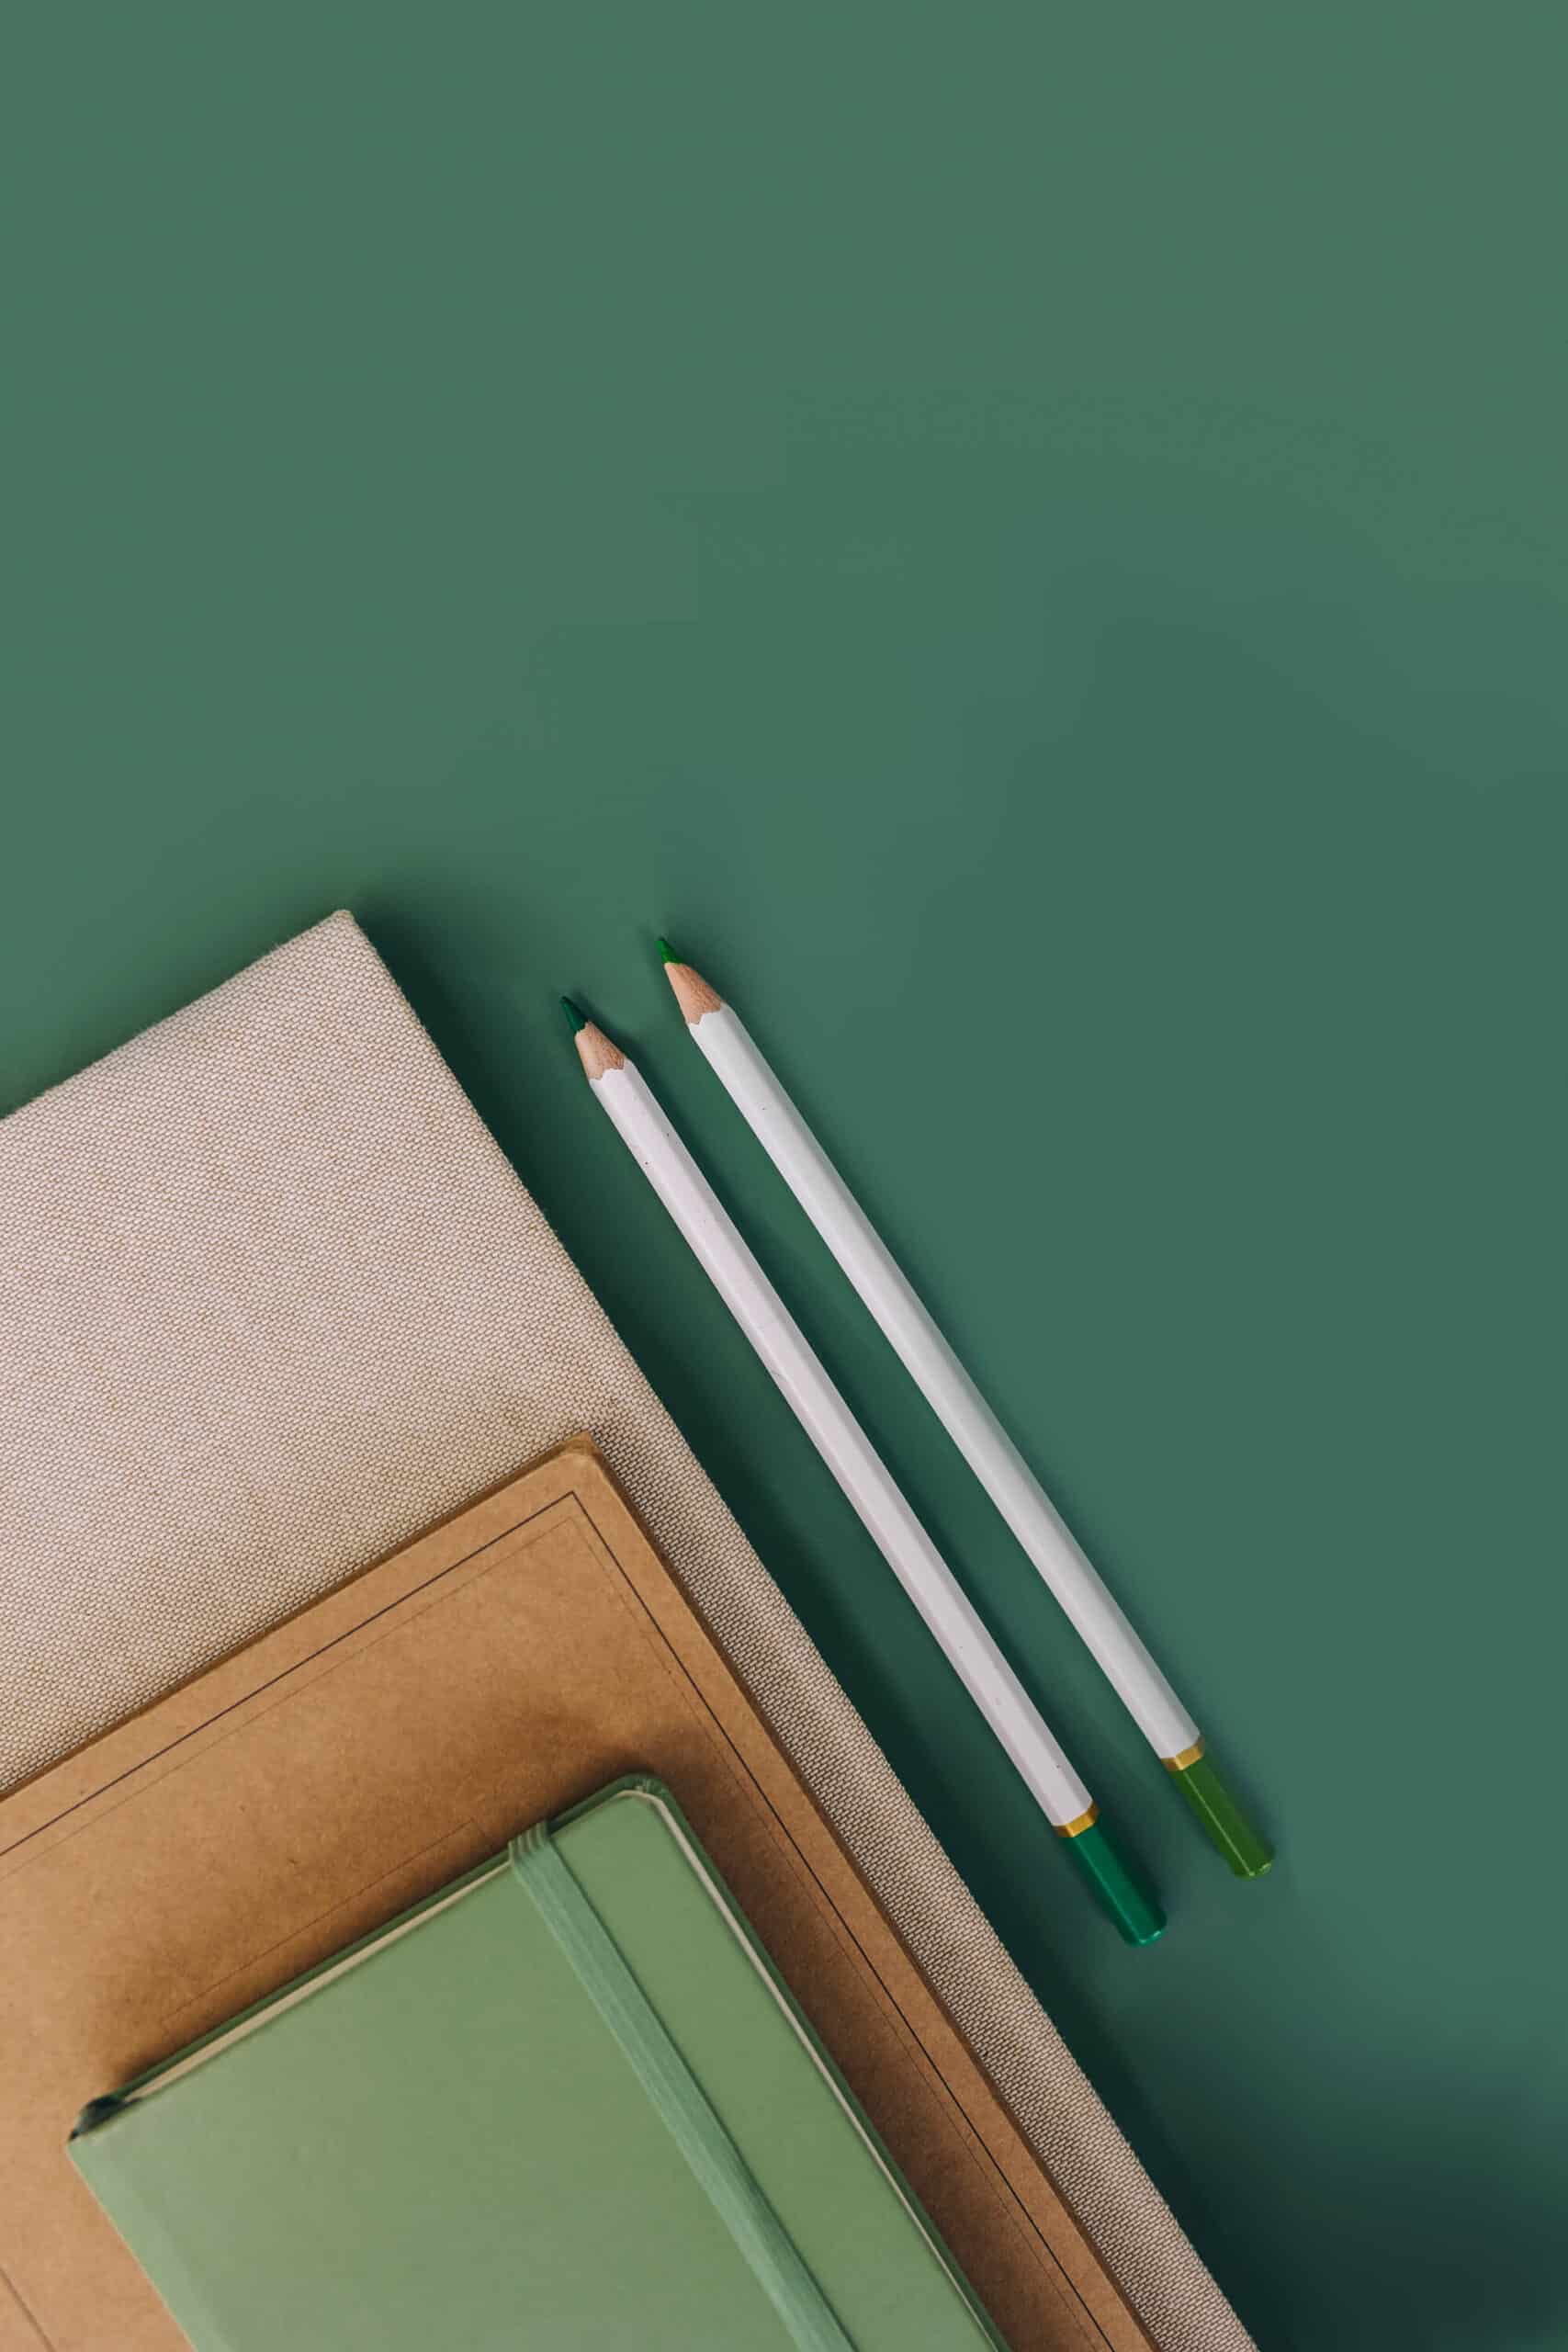 Two green-tipped white pencils placed on a green backdrop next to a stack of notebooks with a brown top notebook and a green one beneath.